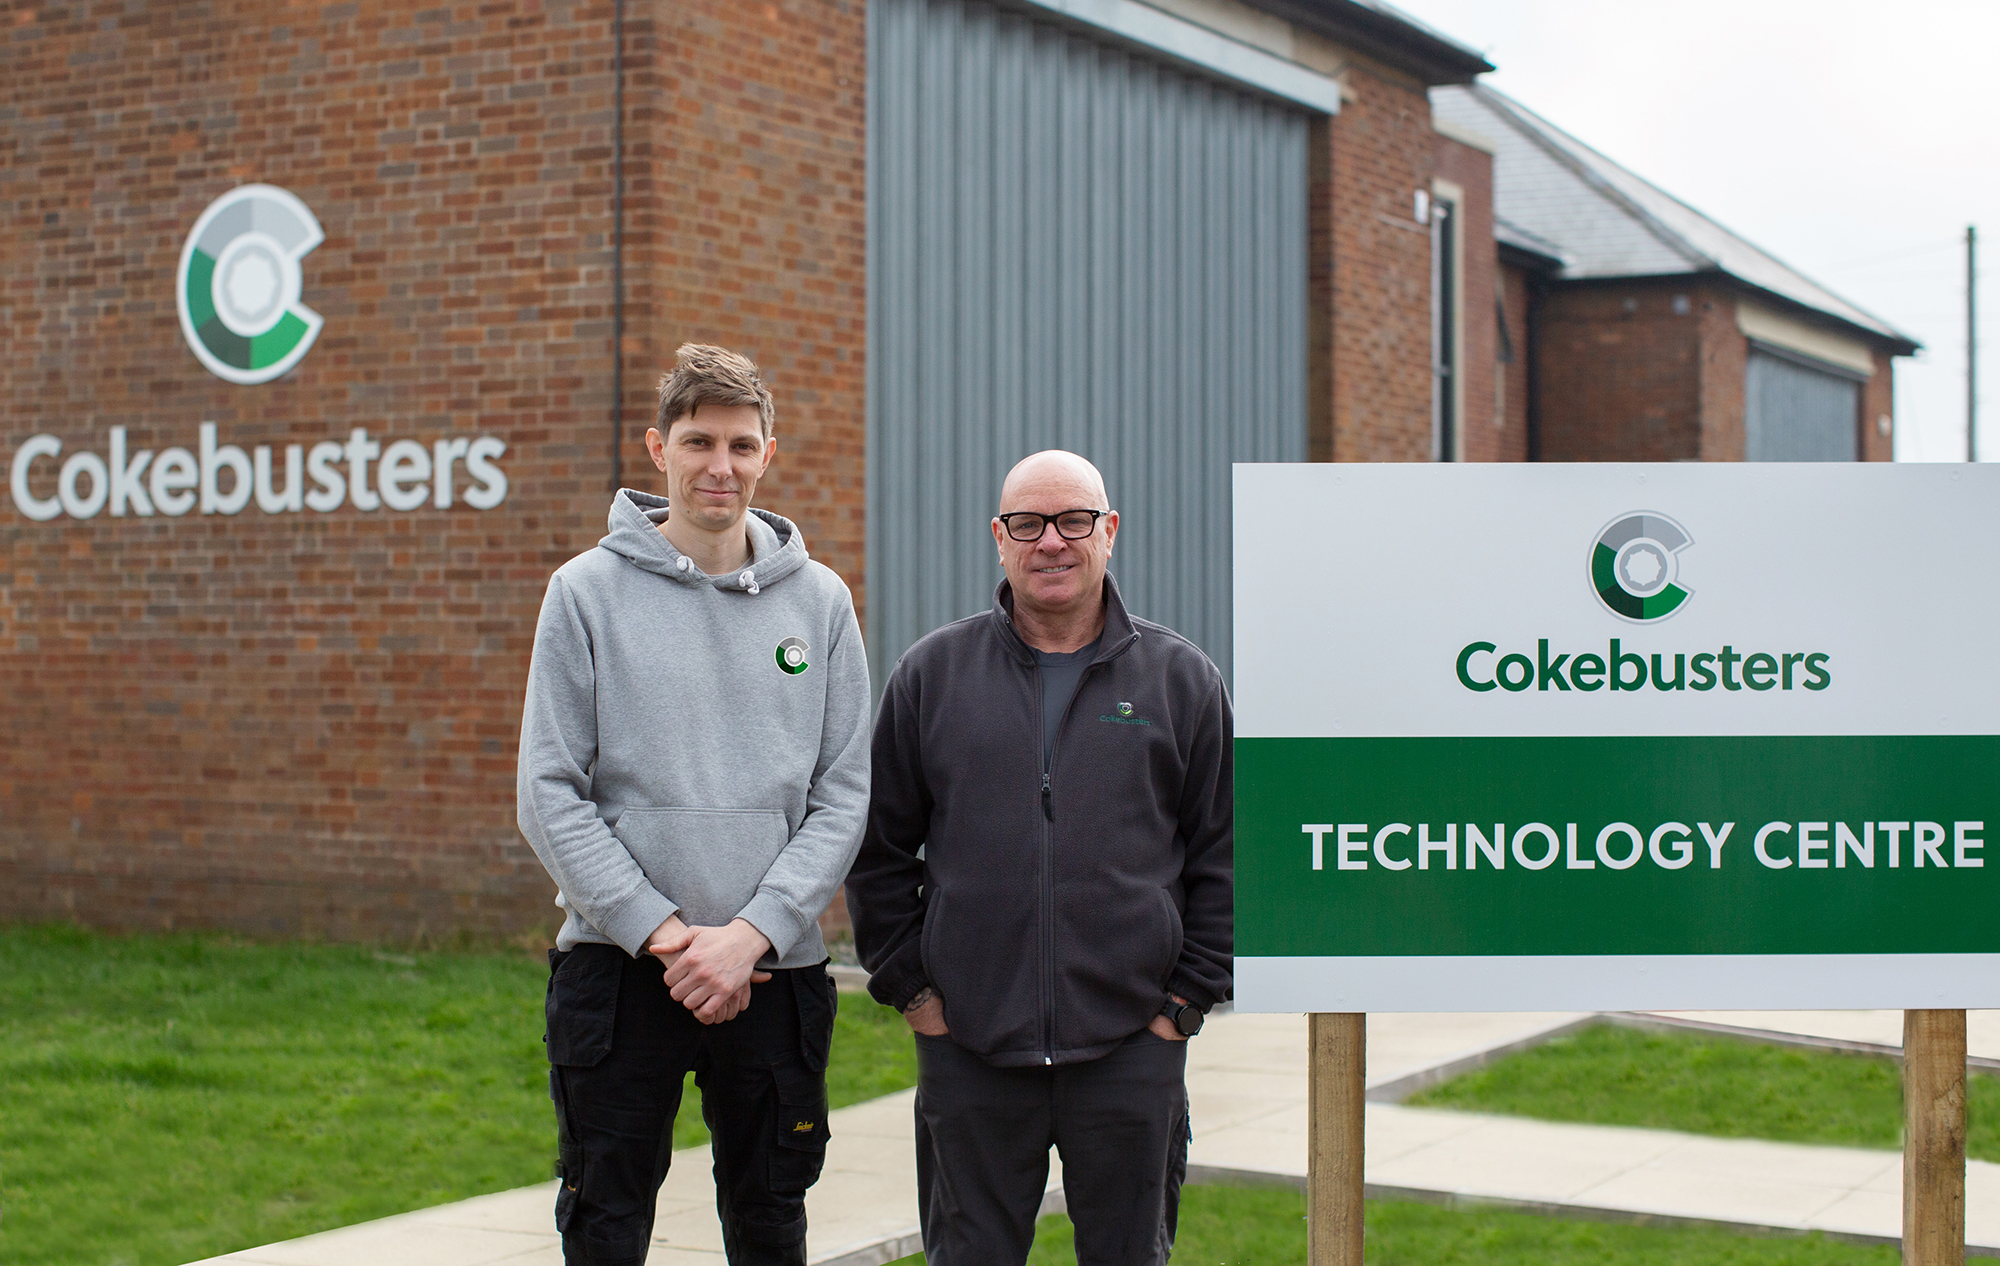 Cokebusters directly employed operators receive promotions following implementation of new training processes for mechanical cleaning site operations.